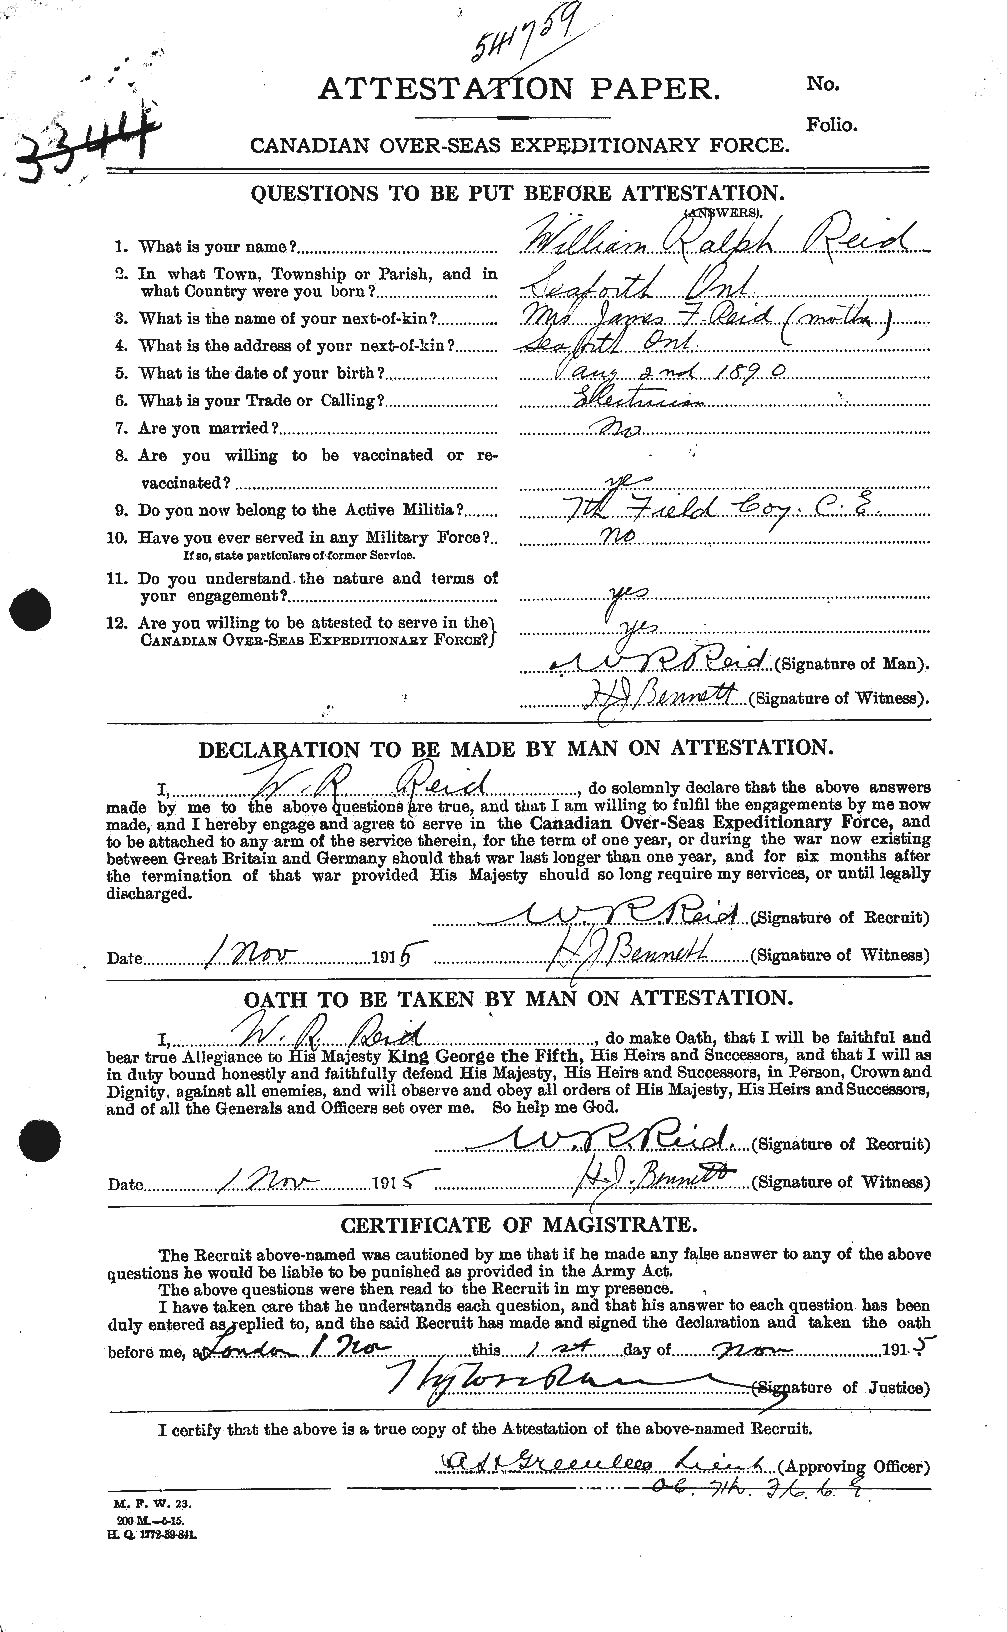 Personnel Records of the First World War - CEF 597029a